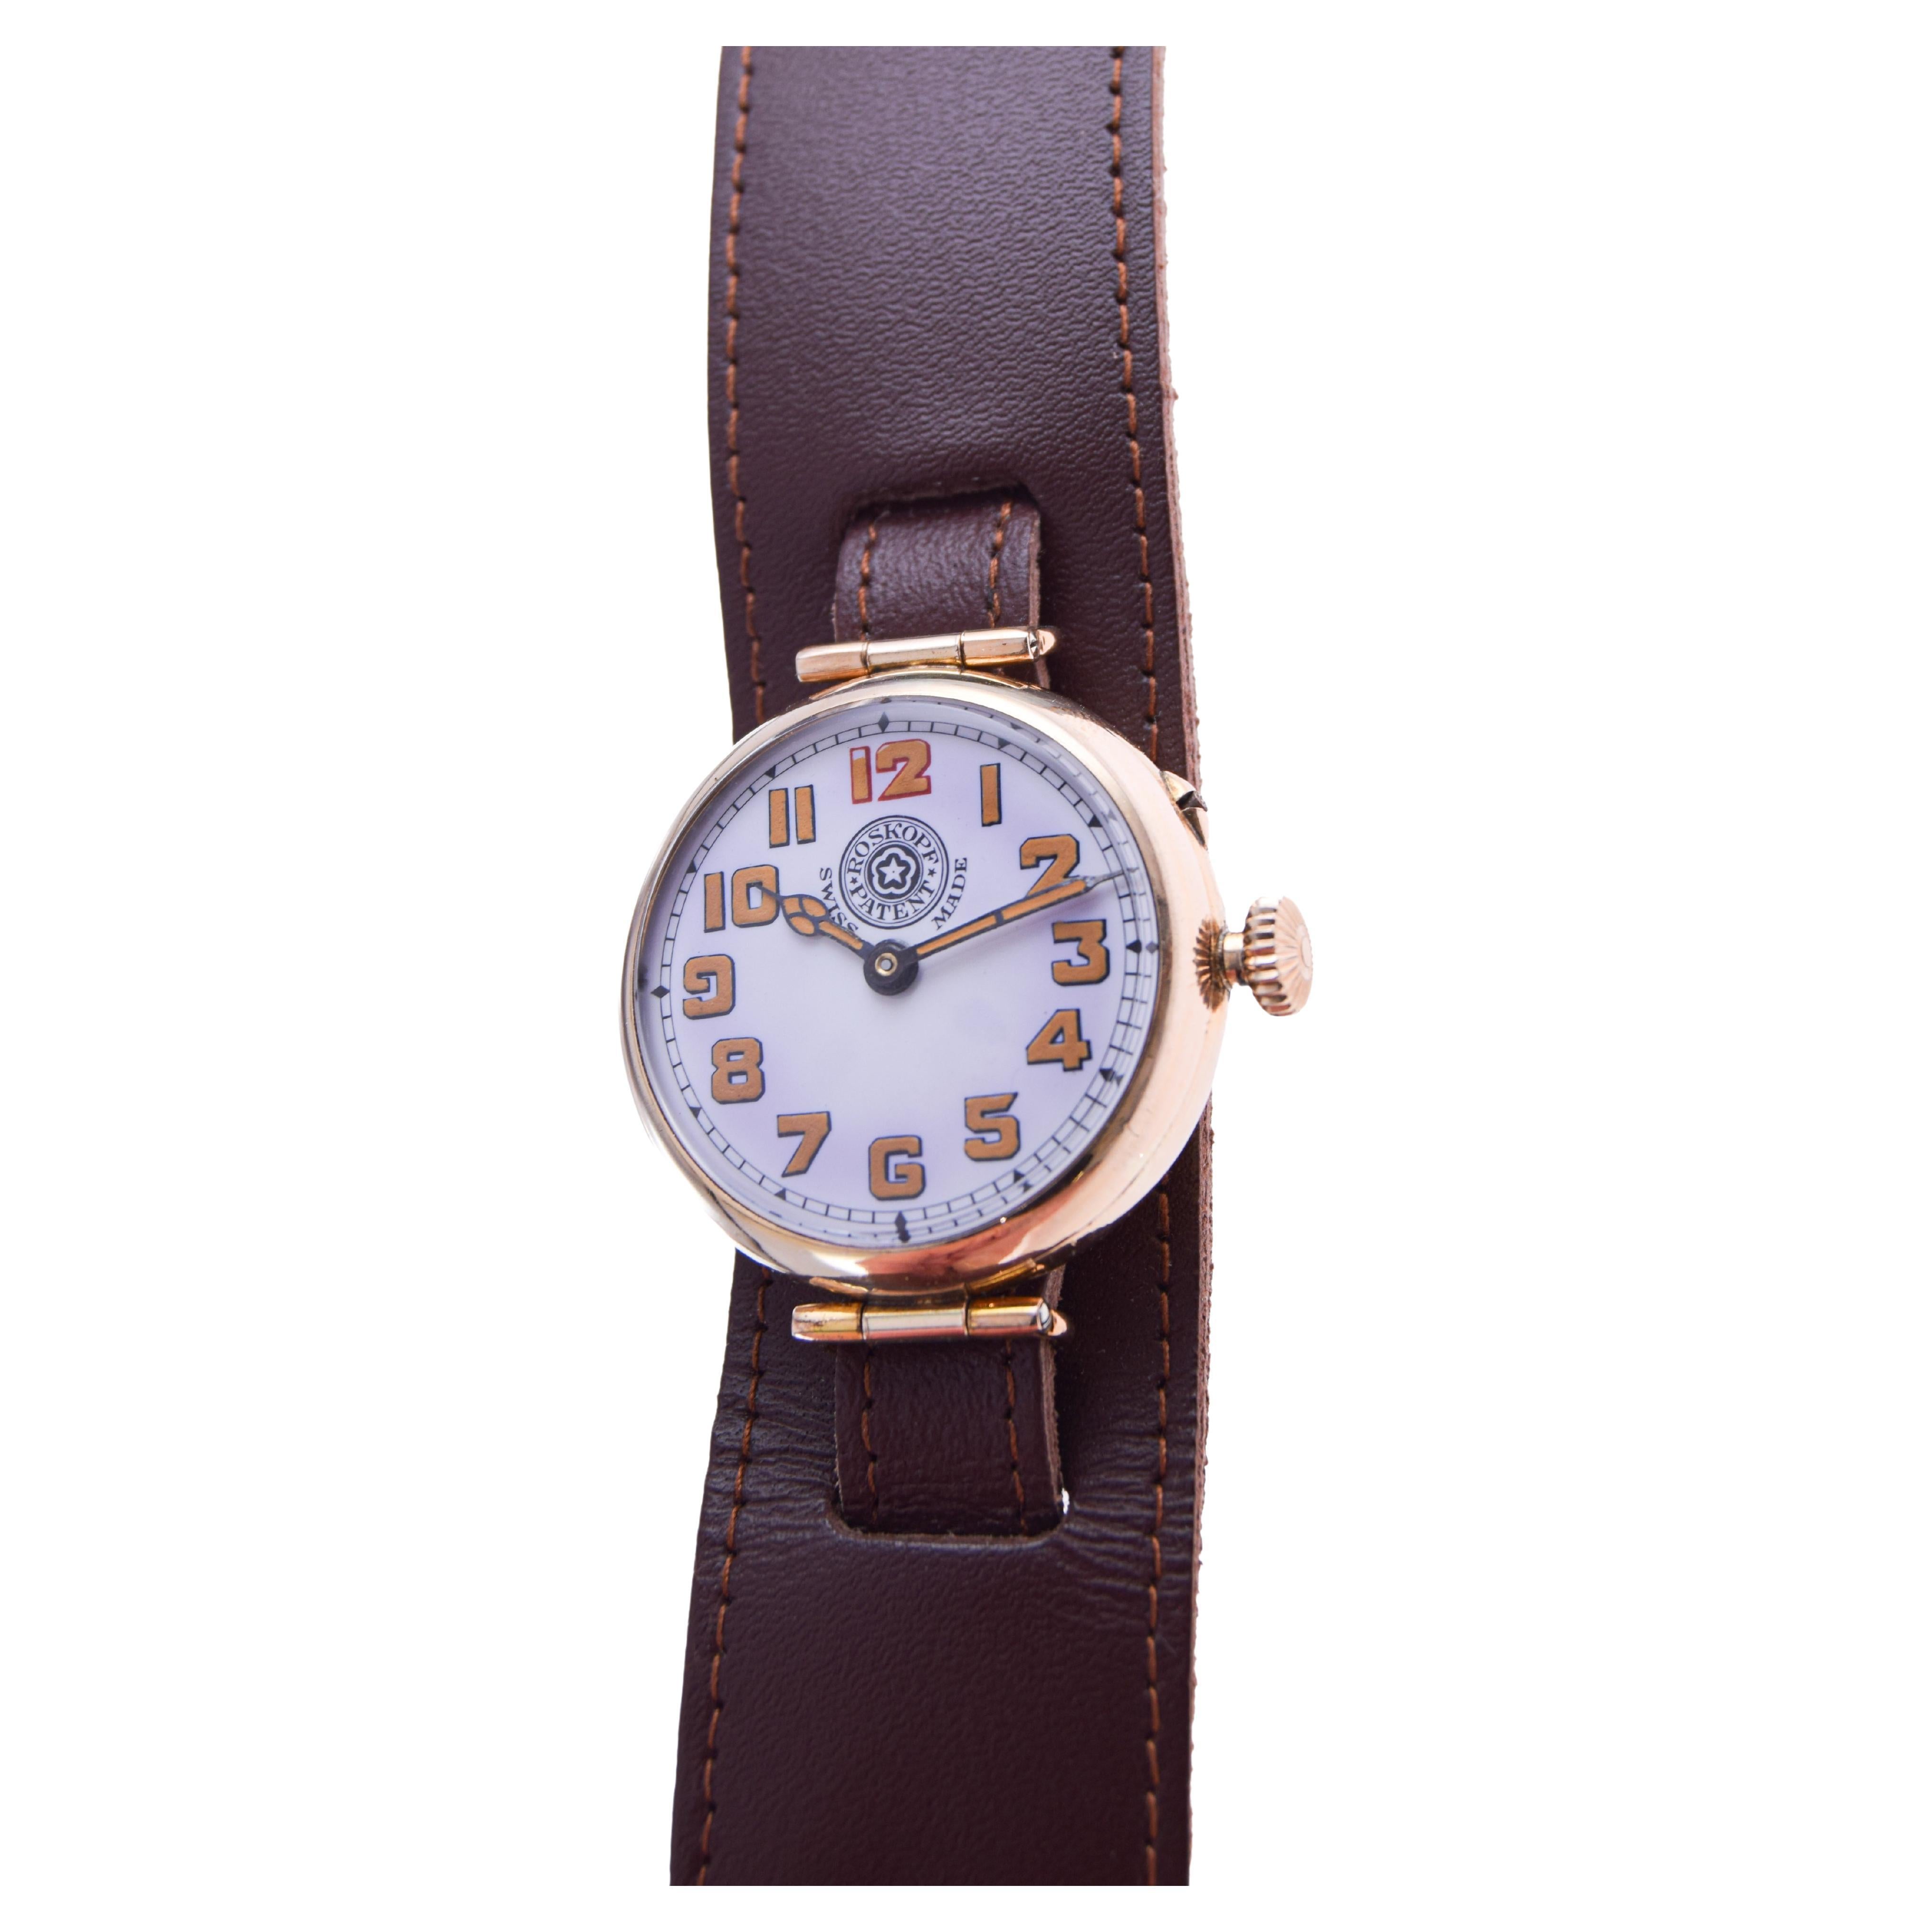 Roskopf Gold-Filled Campaign Style with Original Flawless Enamel Dial Circa 1910 For Sale 3